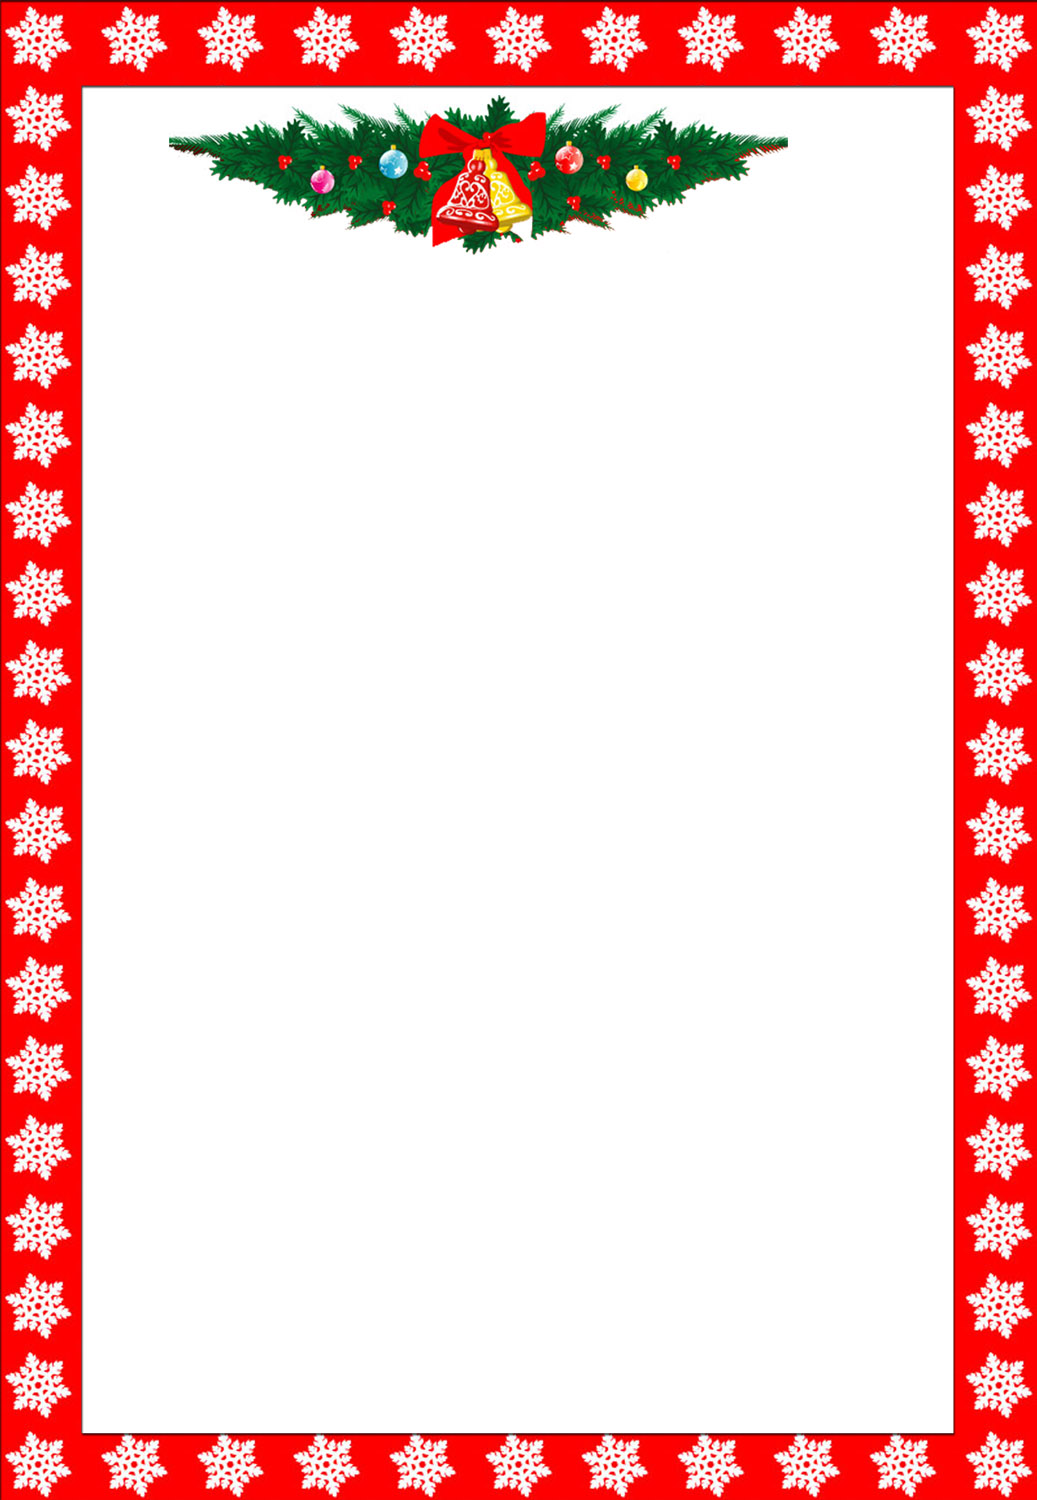 Free Christmas Cliparts Border Download Free Christmas Cliparts Border Png Images Free Cliparts On Clipart Library